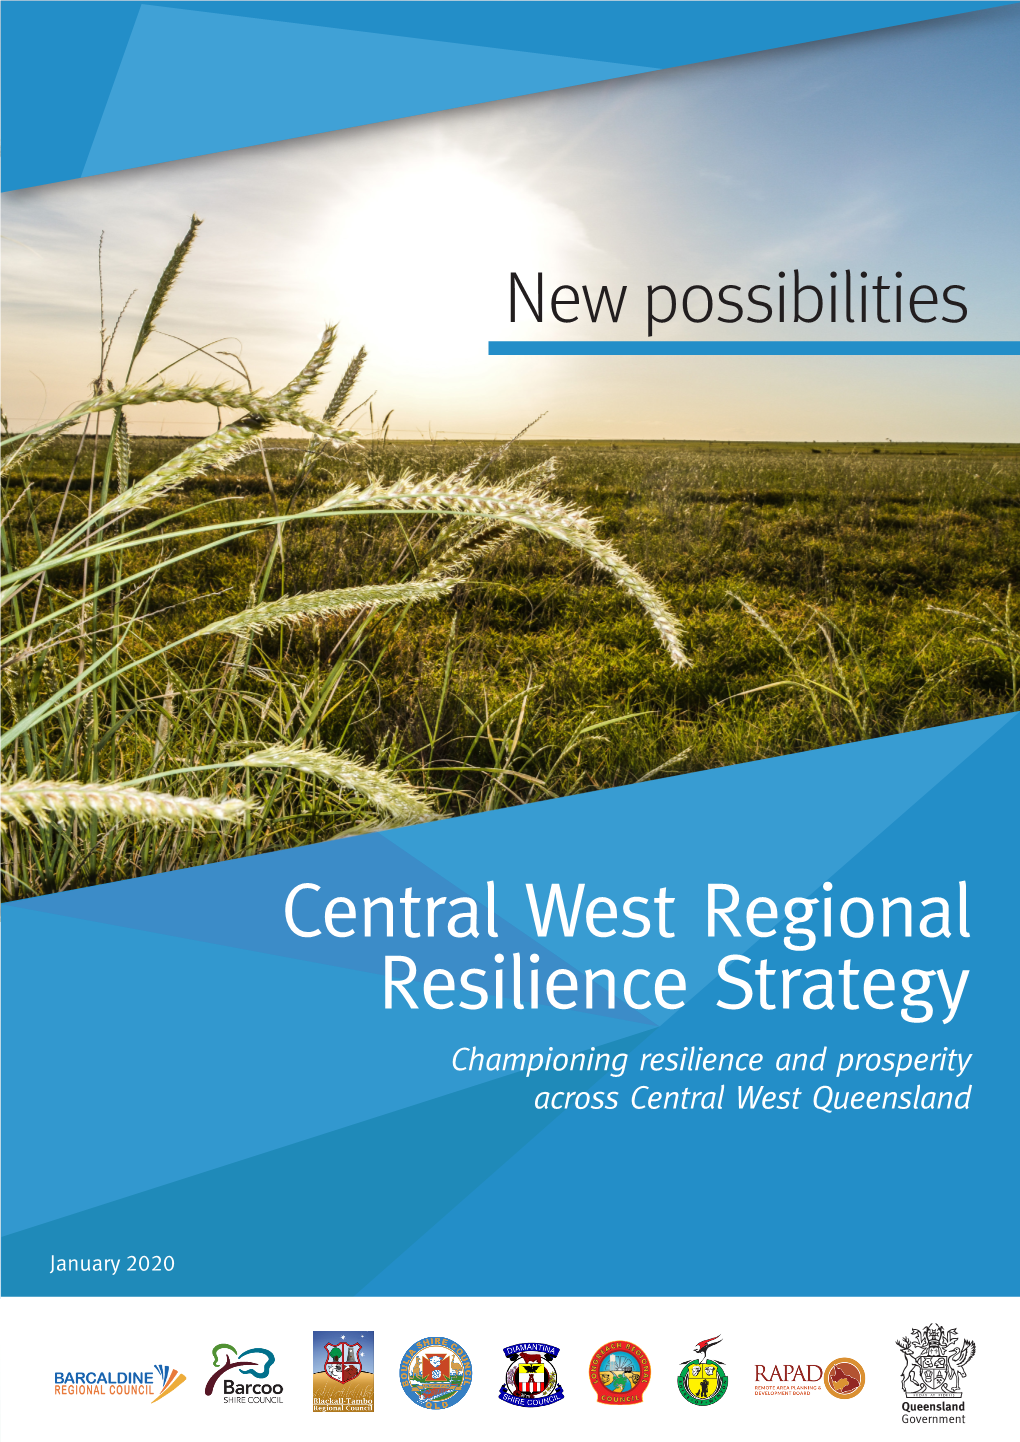 Central West Regional Resilience Strategy Championing Resilience and Prosperity Across Central West Queensland